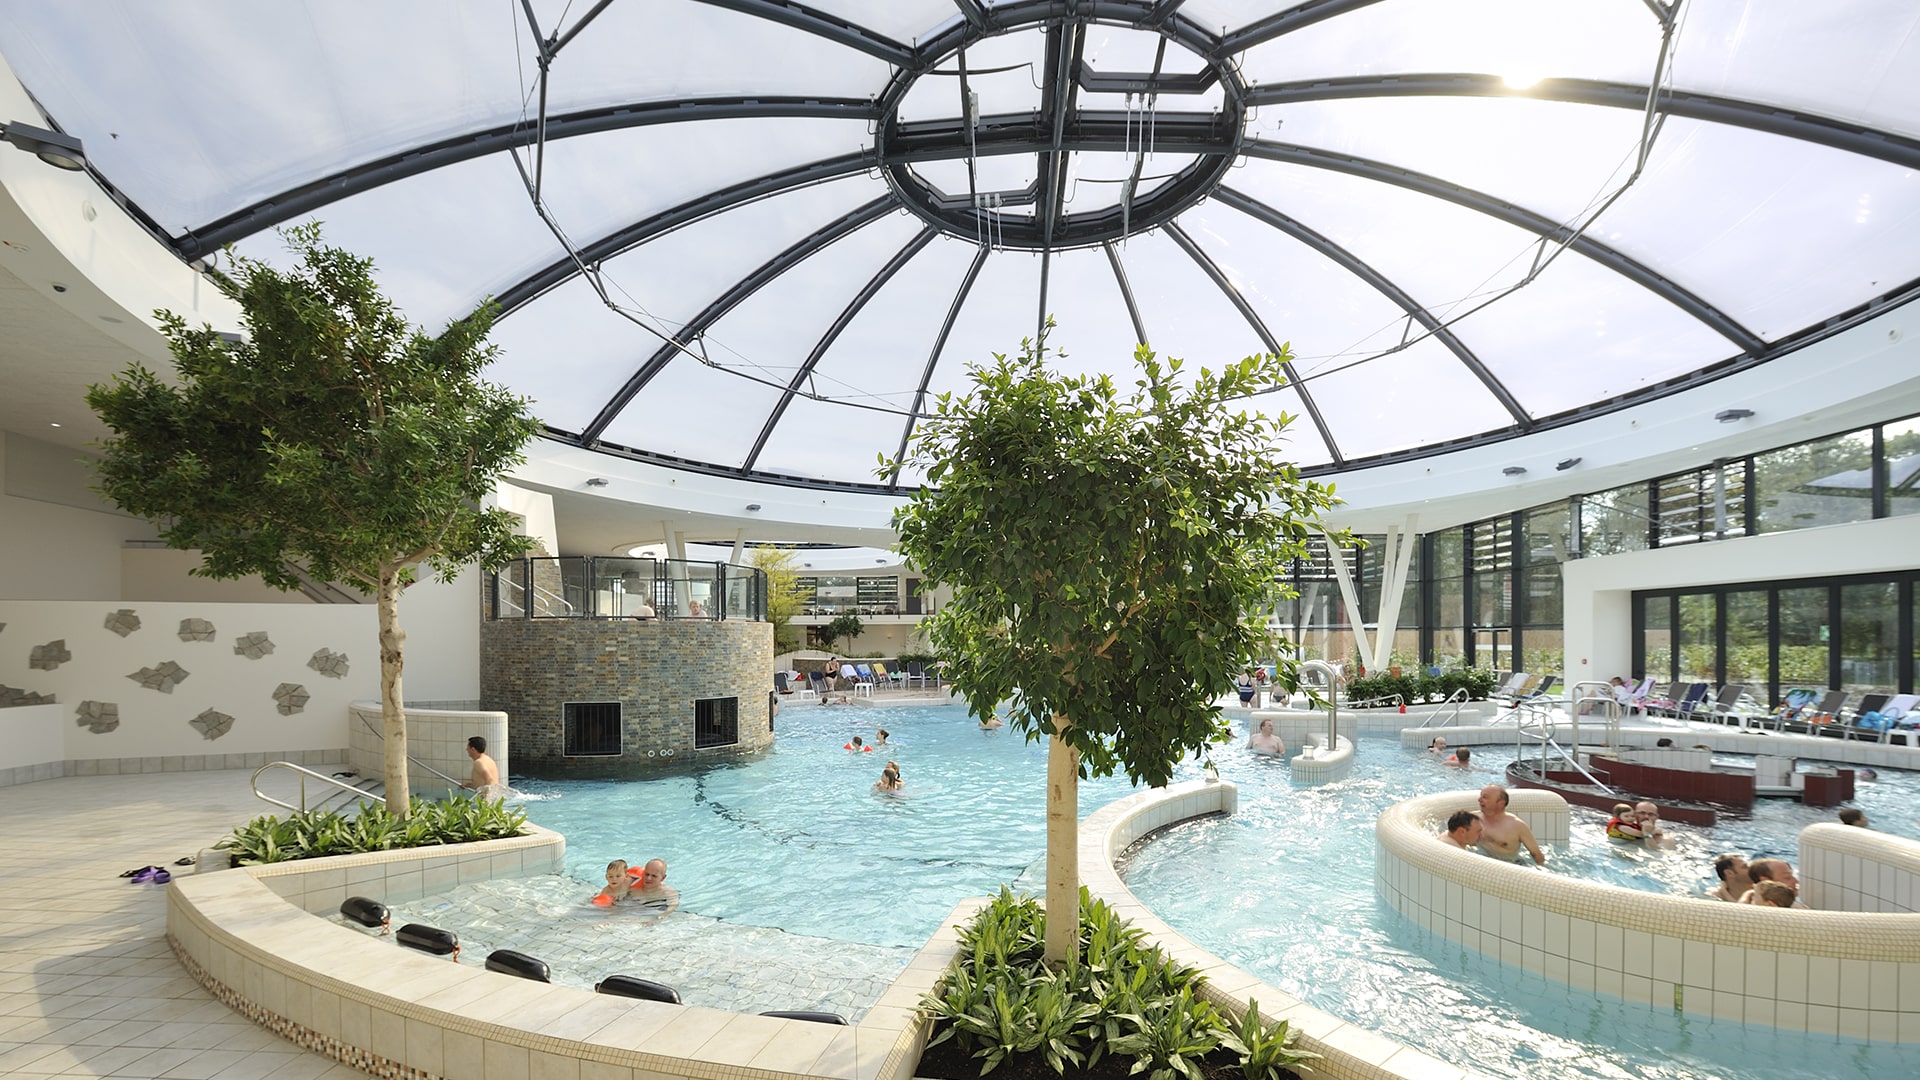 One of the “highlights” at Graft Therme waterpark is the domed Texlon® ETFE skylight spanning more than 25m over the leisure pool.